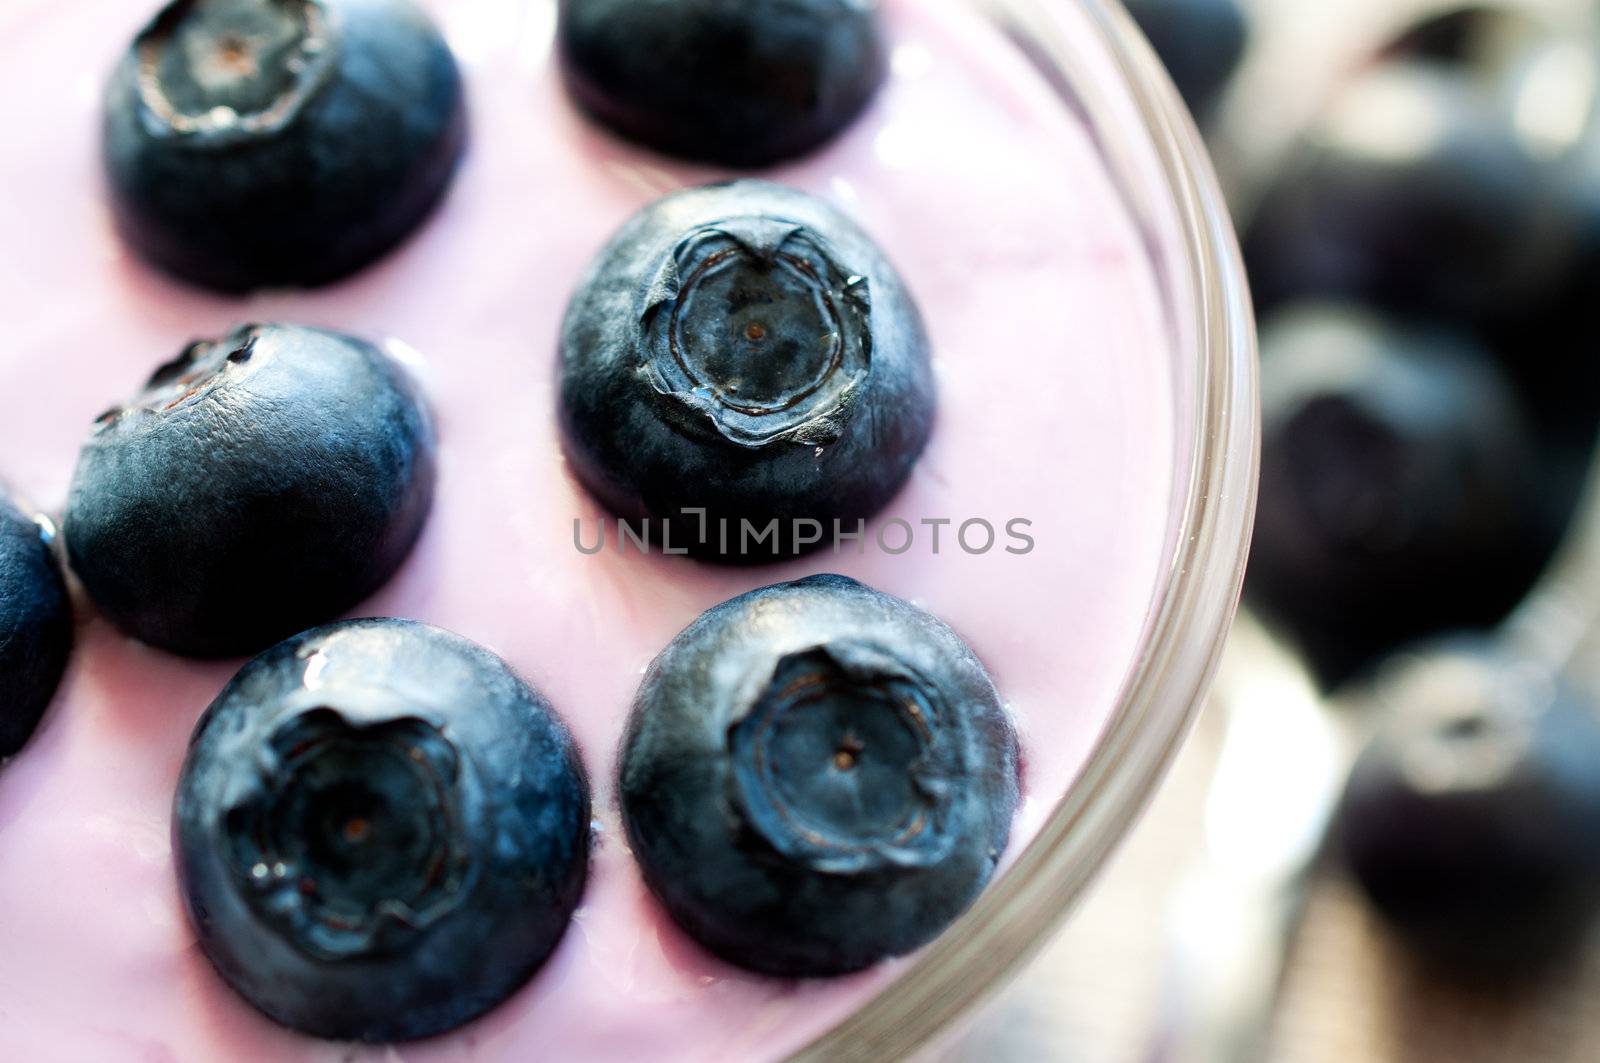 Blueberry yogurt with blueberries in glass close up